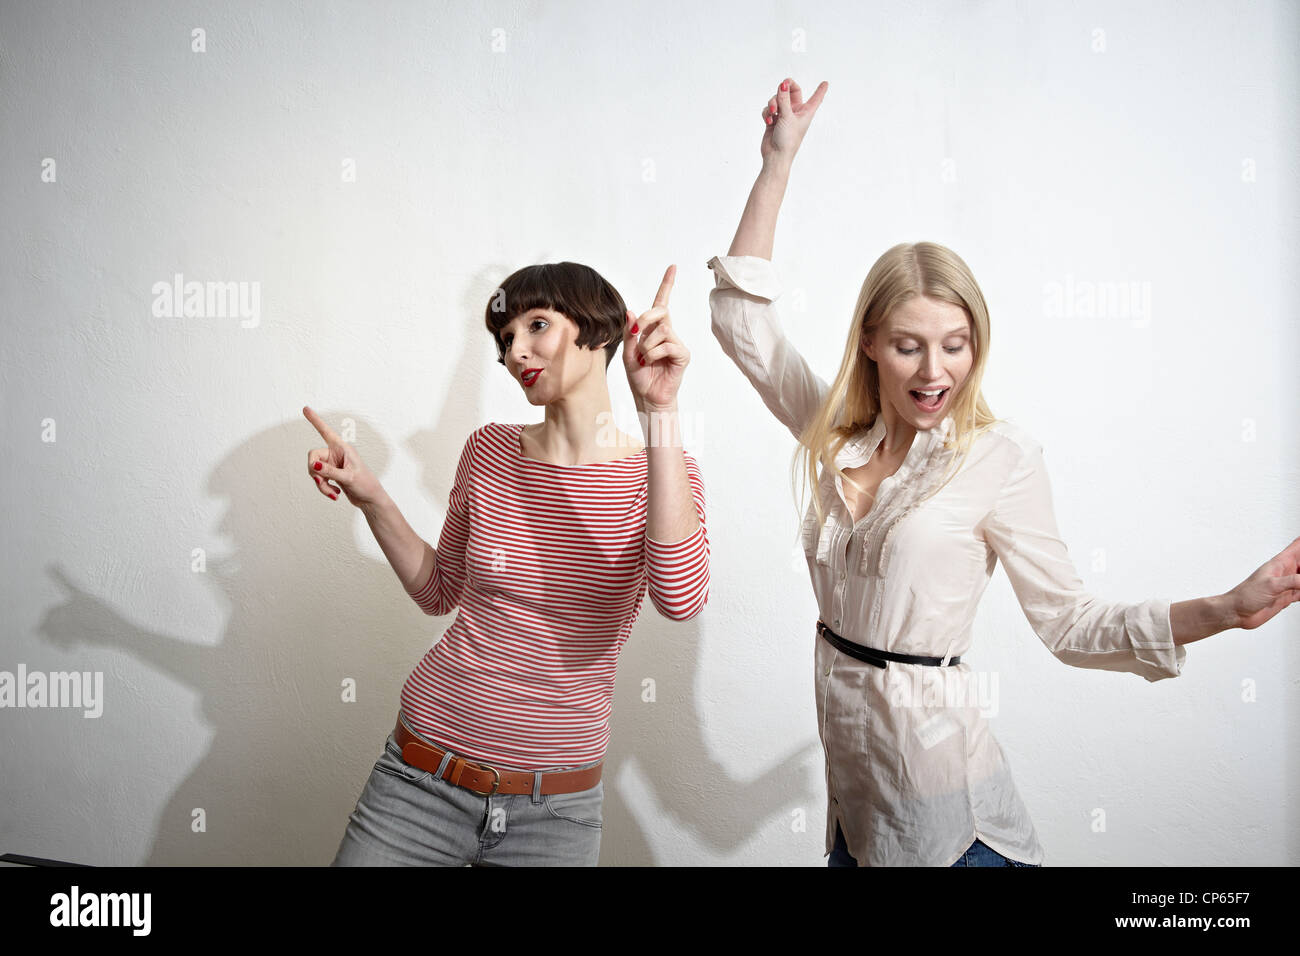 Germany, Cologne, Young women having fun, smiling Banque D'Images